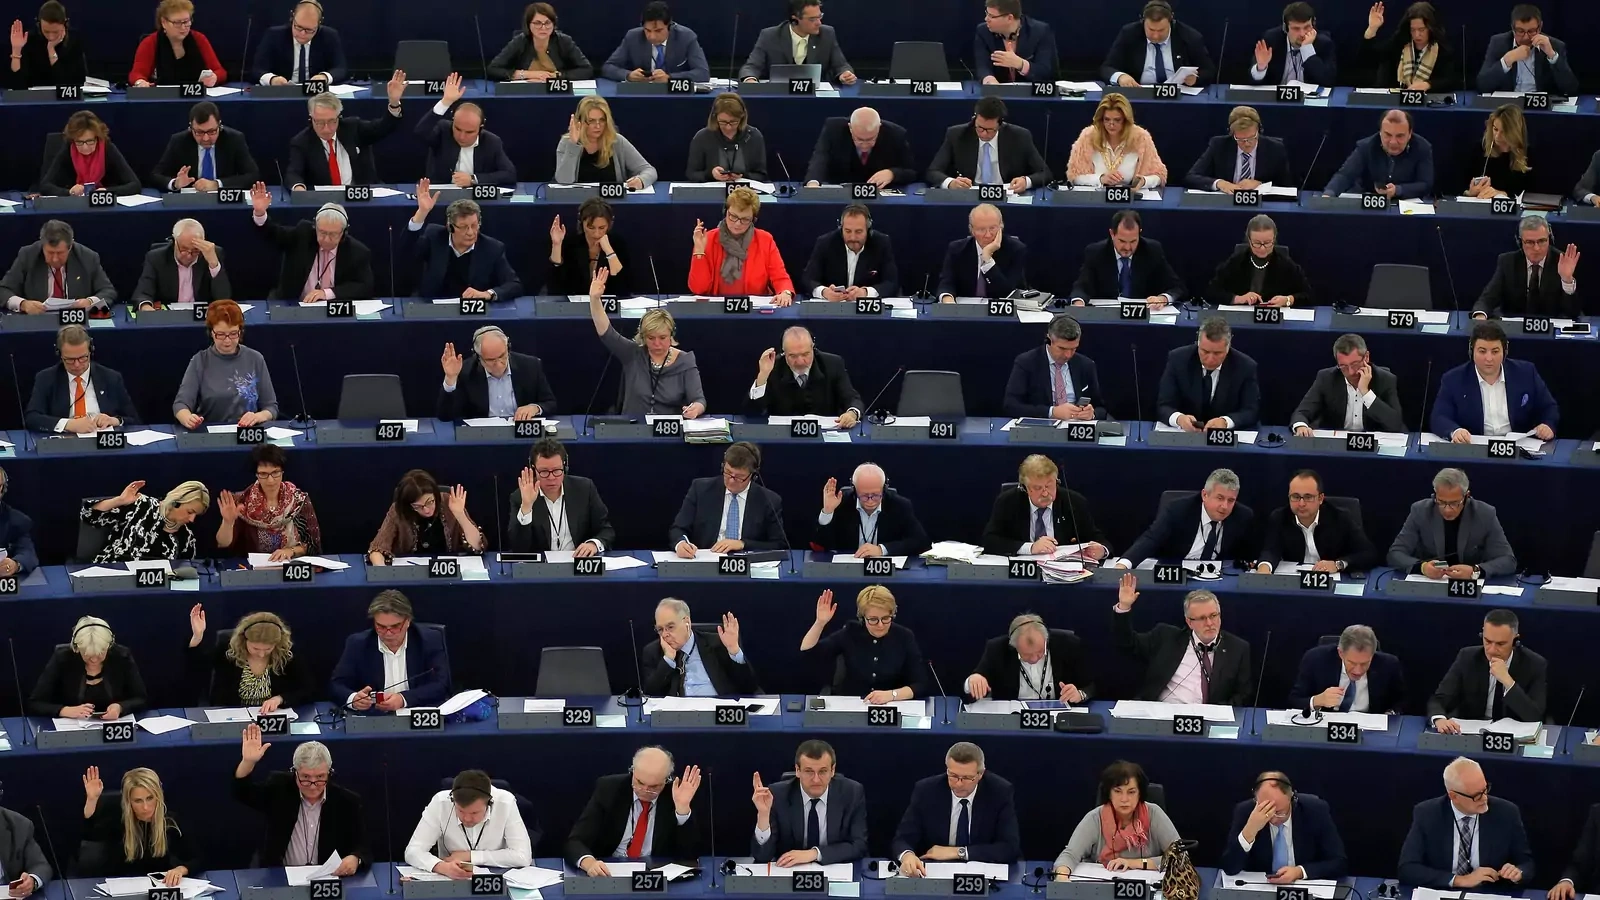 Members of the European Parliament take part in a voting session in Strasbourg, France.